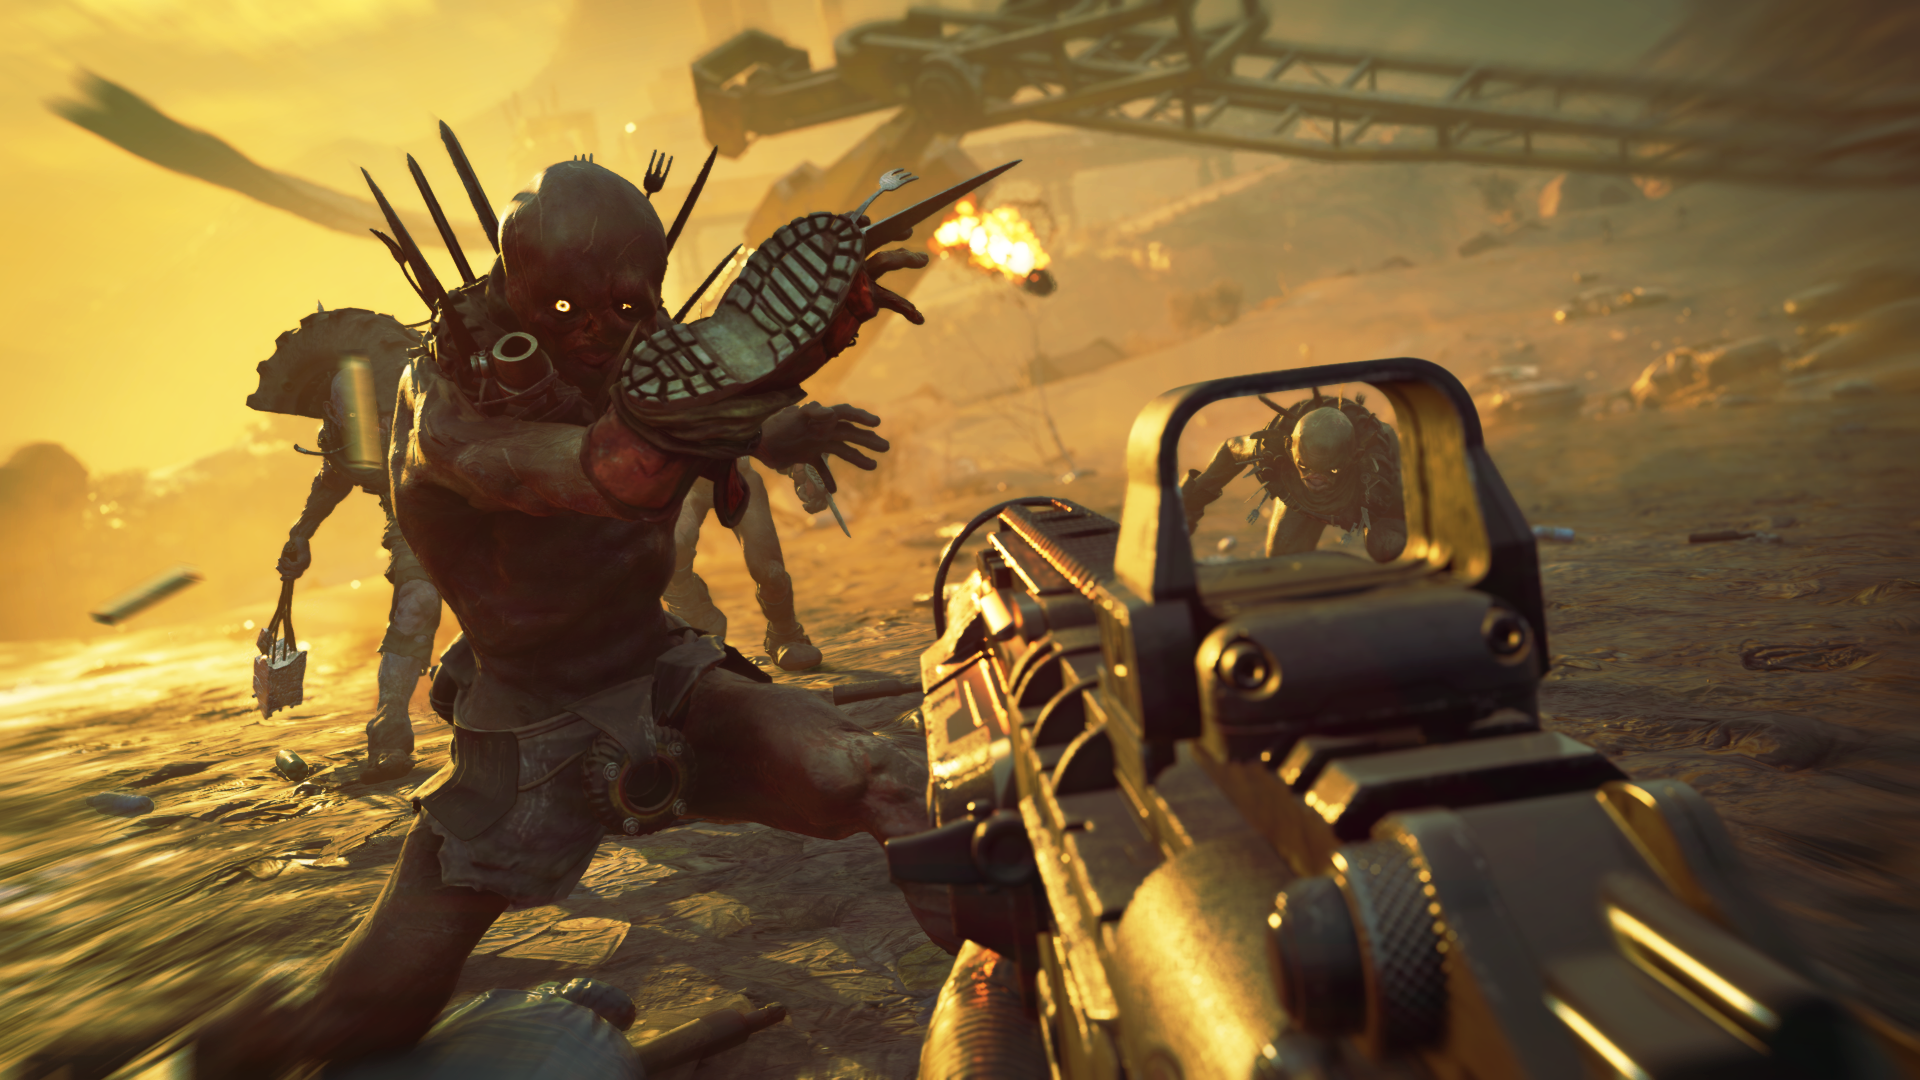 Rage 2 Gets On Top Of The UK Games Chart